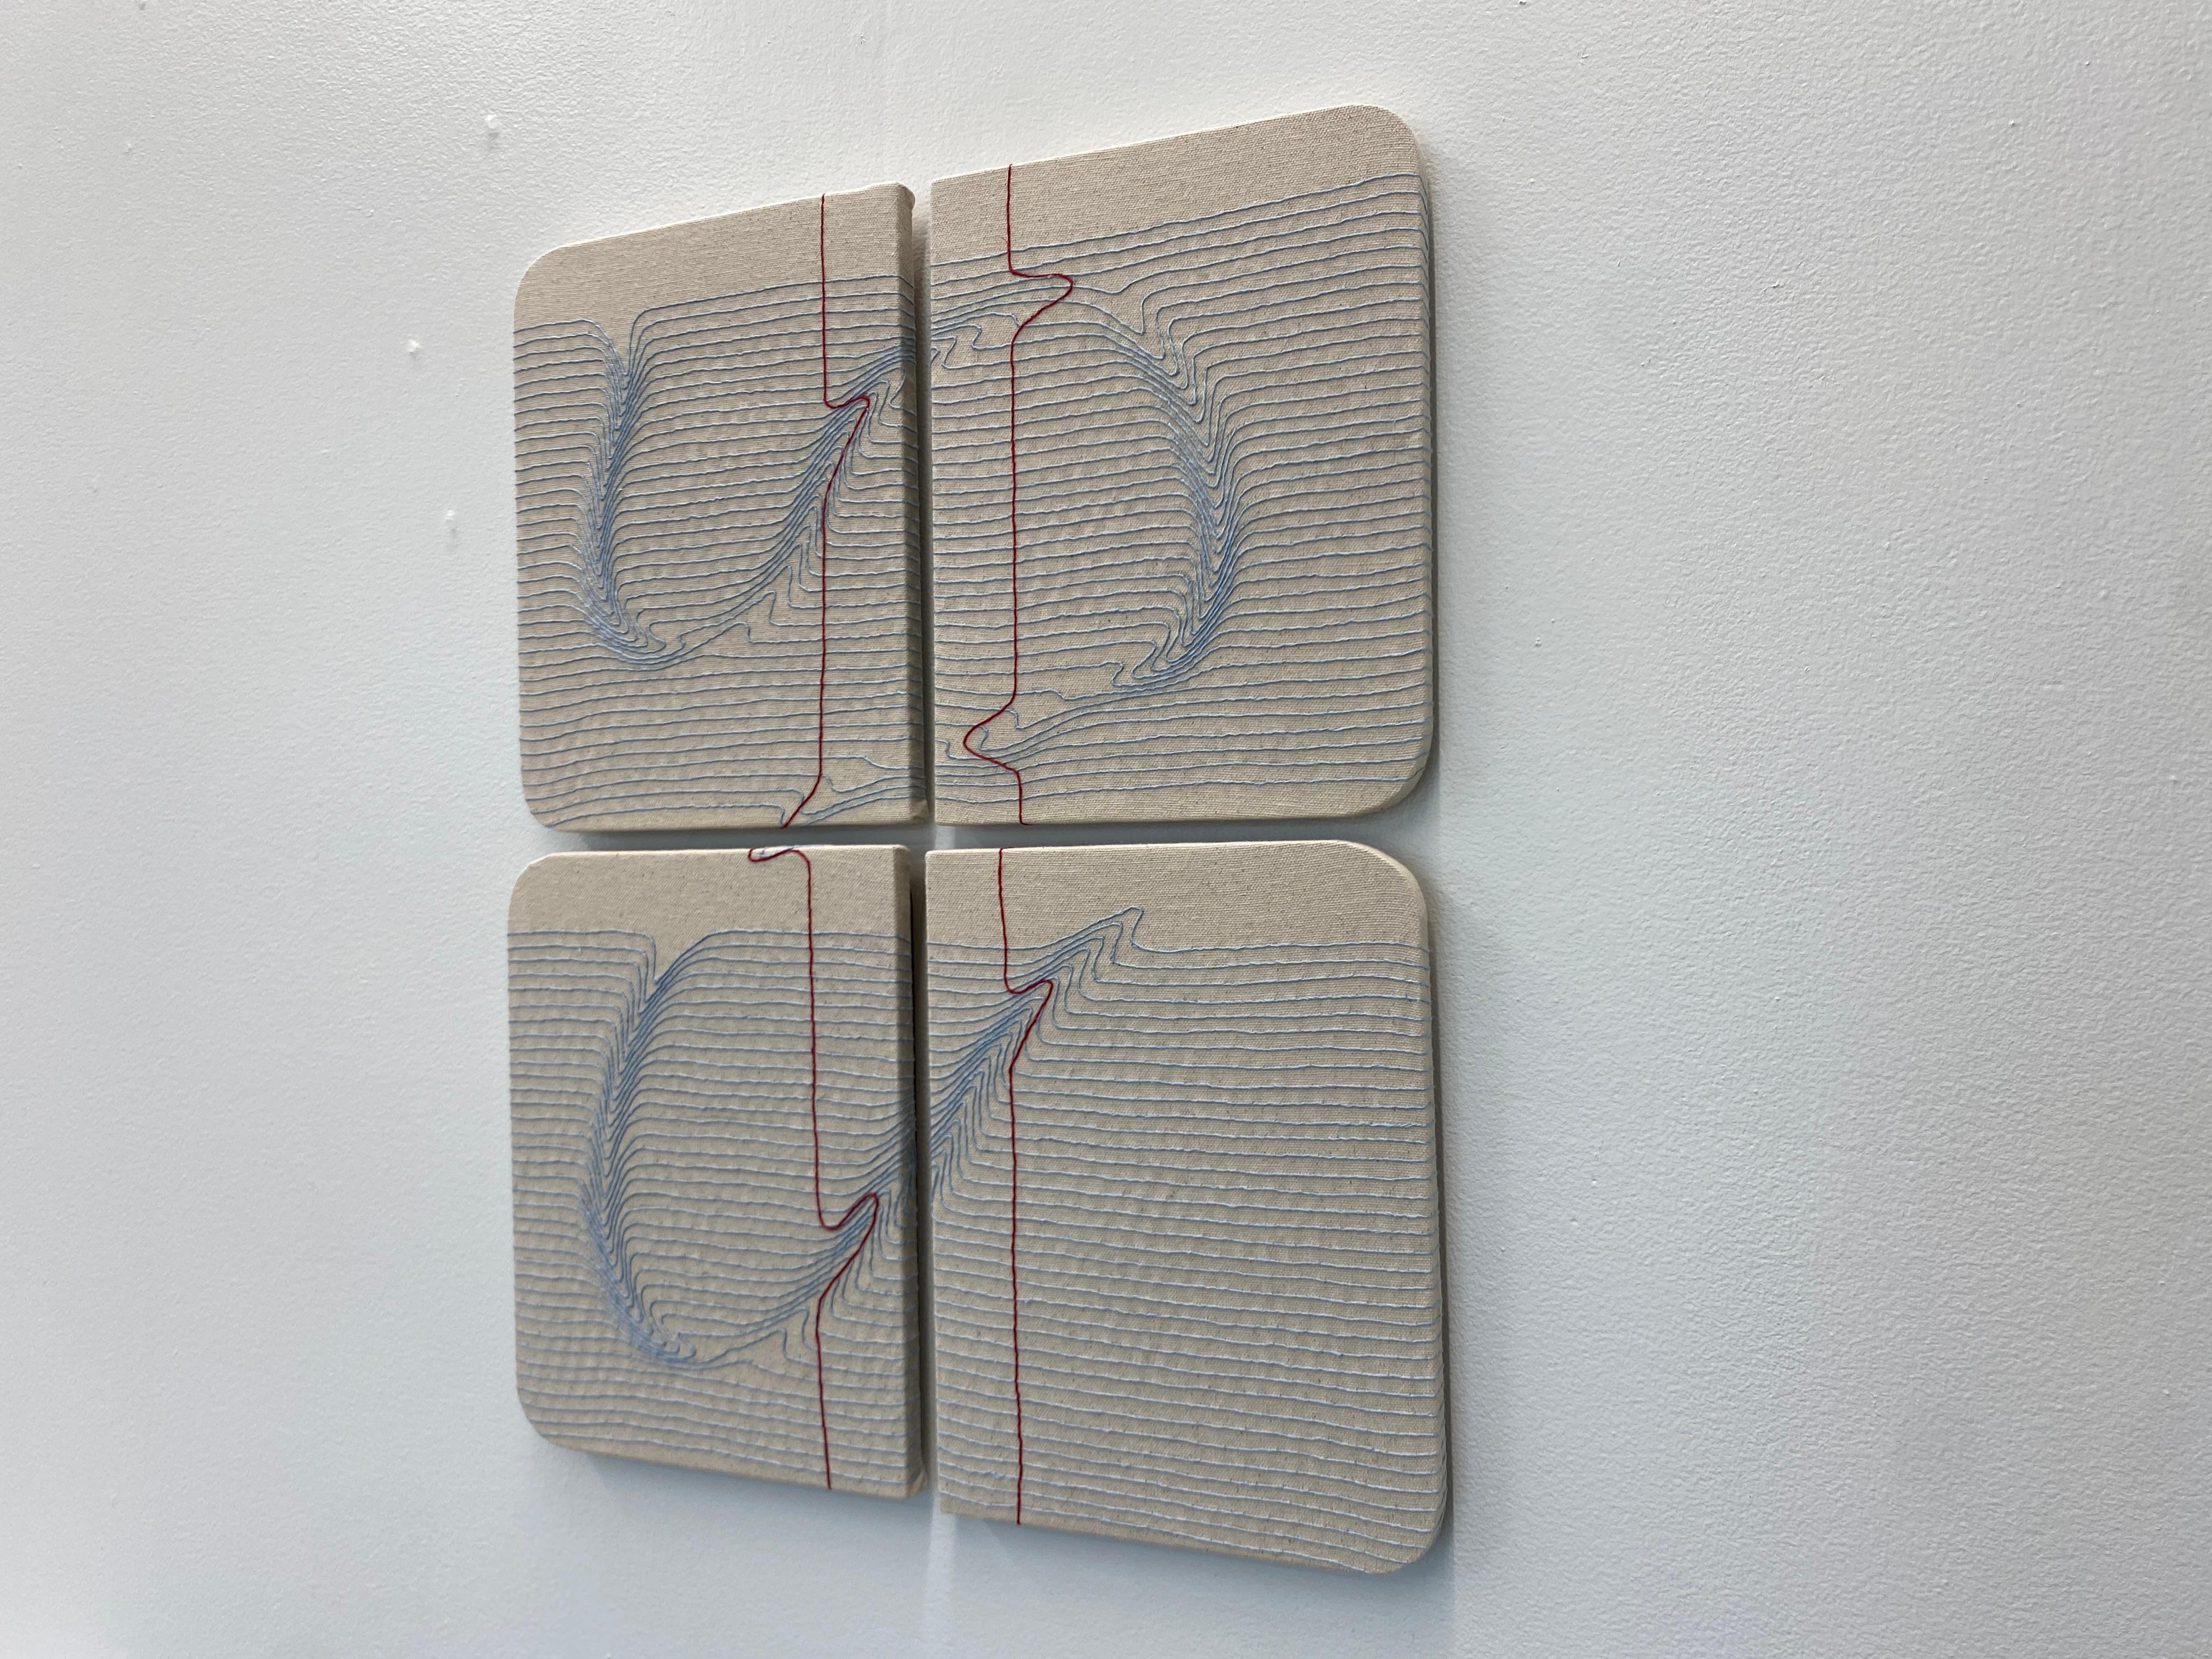 Notes for String Theory 11272022, Contemporary Textile Art, Embroidery on Canvas - Sculpture by Candace Hicks